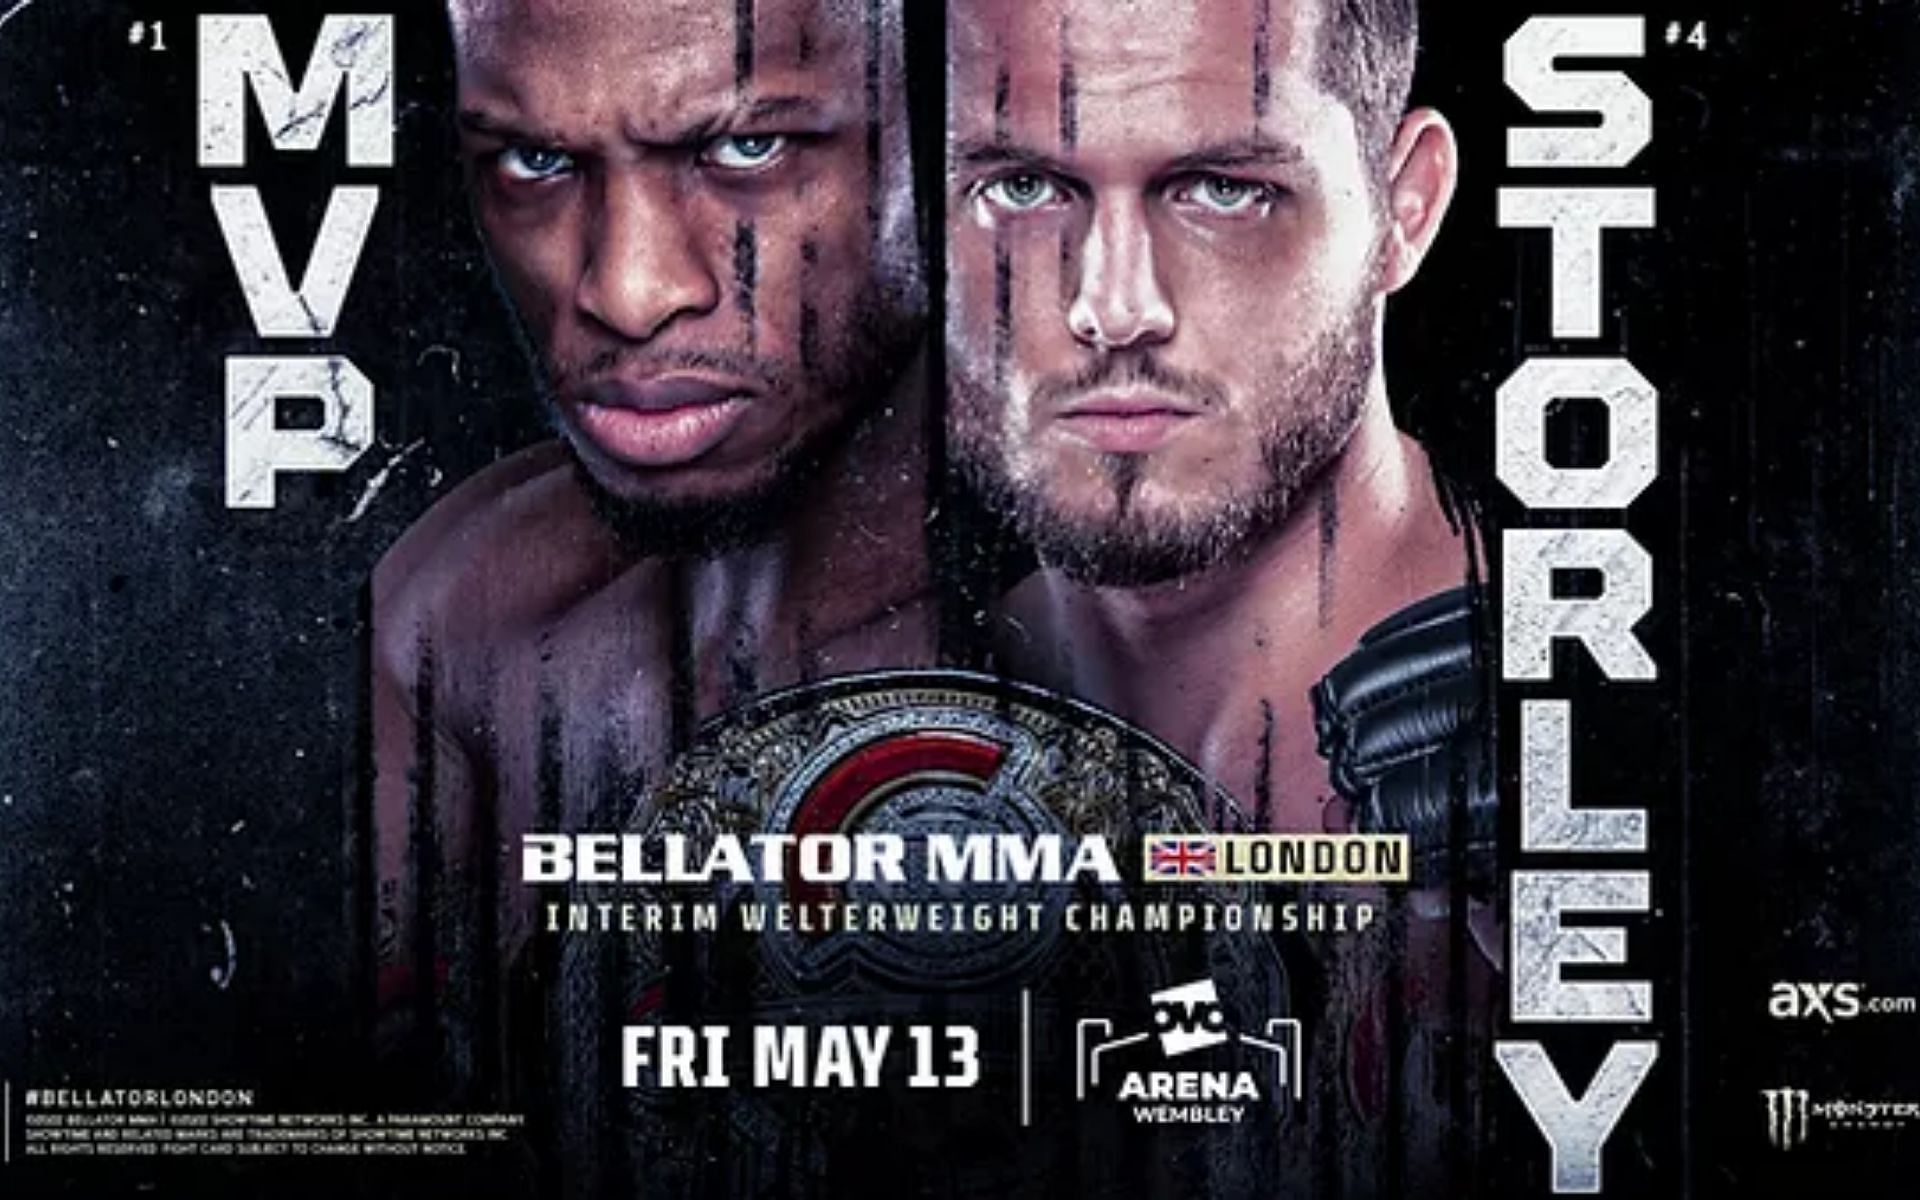 An interim welterweight champion will be crowned in London, England (Photo credit: Bellator MMA)